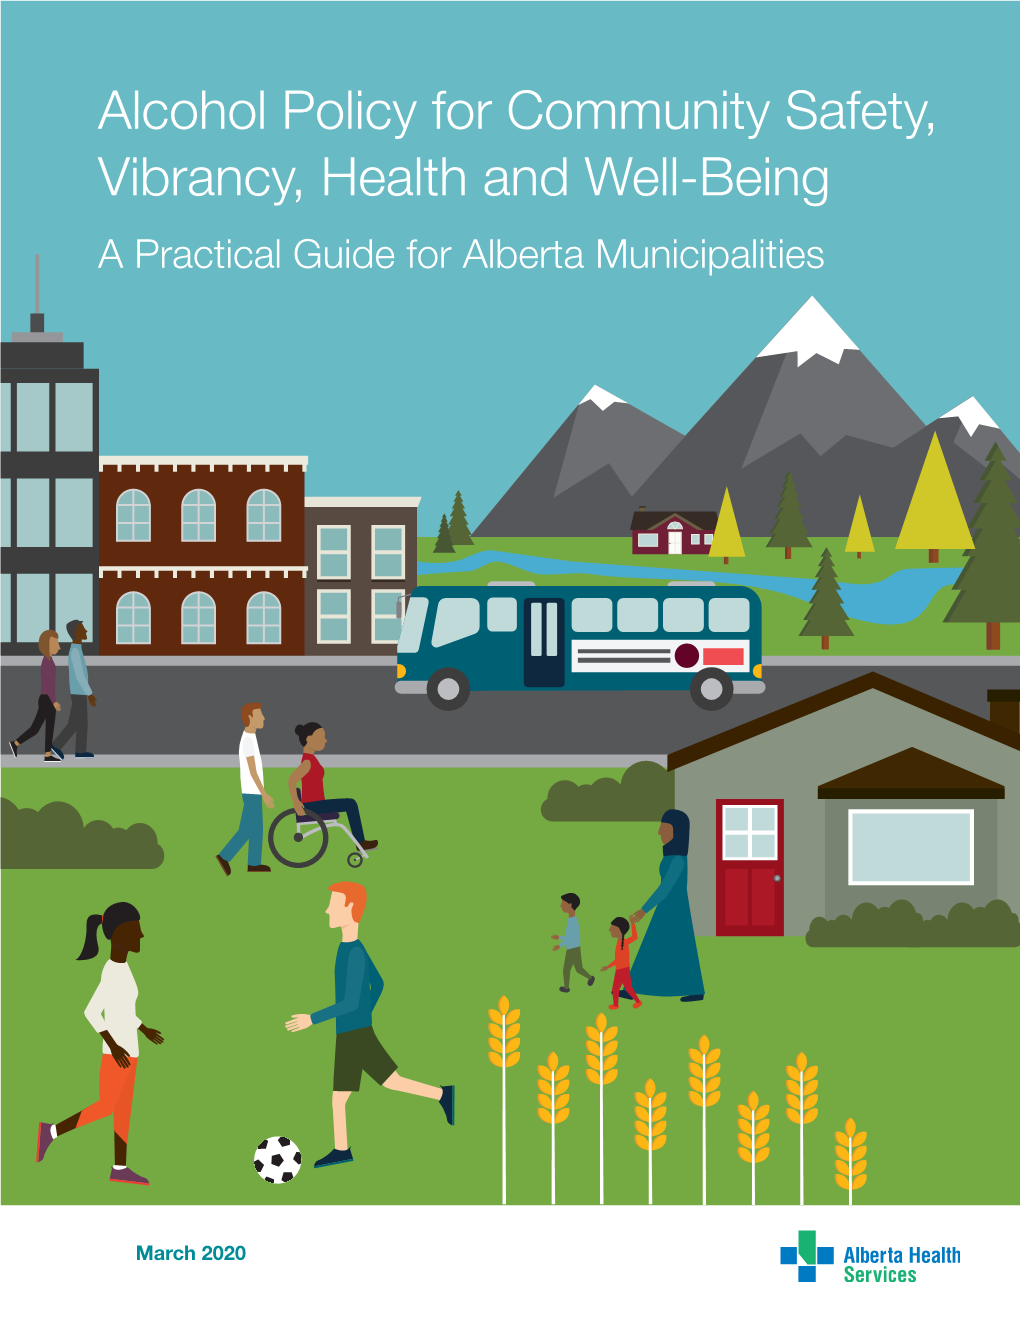 Alcohol Policy for Community Safety, Vibrancy, Health and Well-Being a Practical Guide for Alberta Municipalities